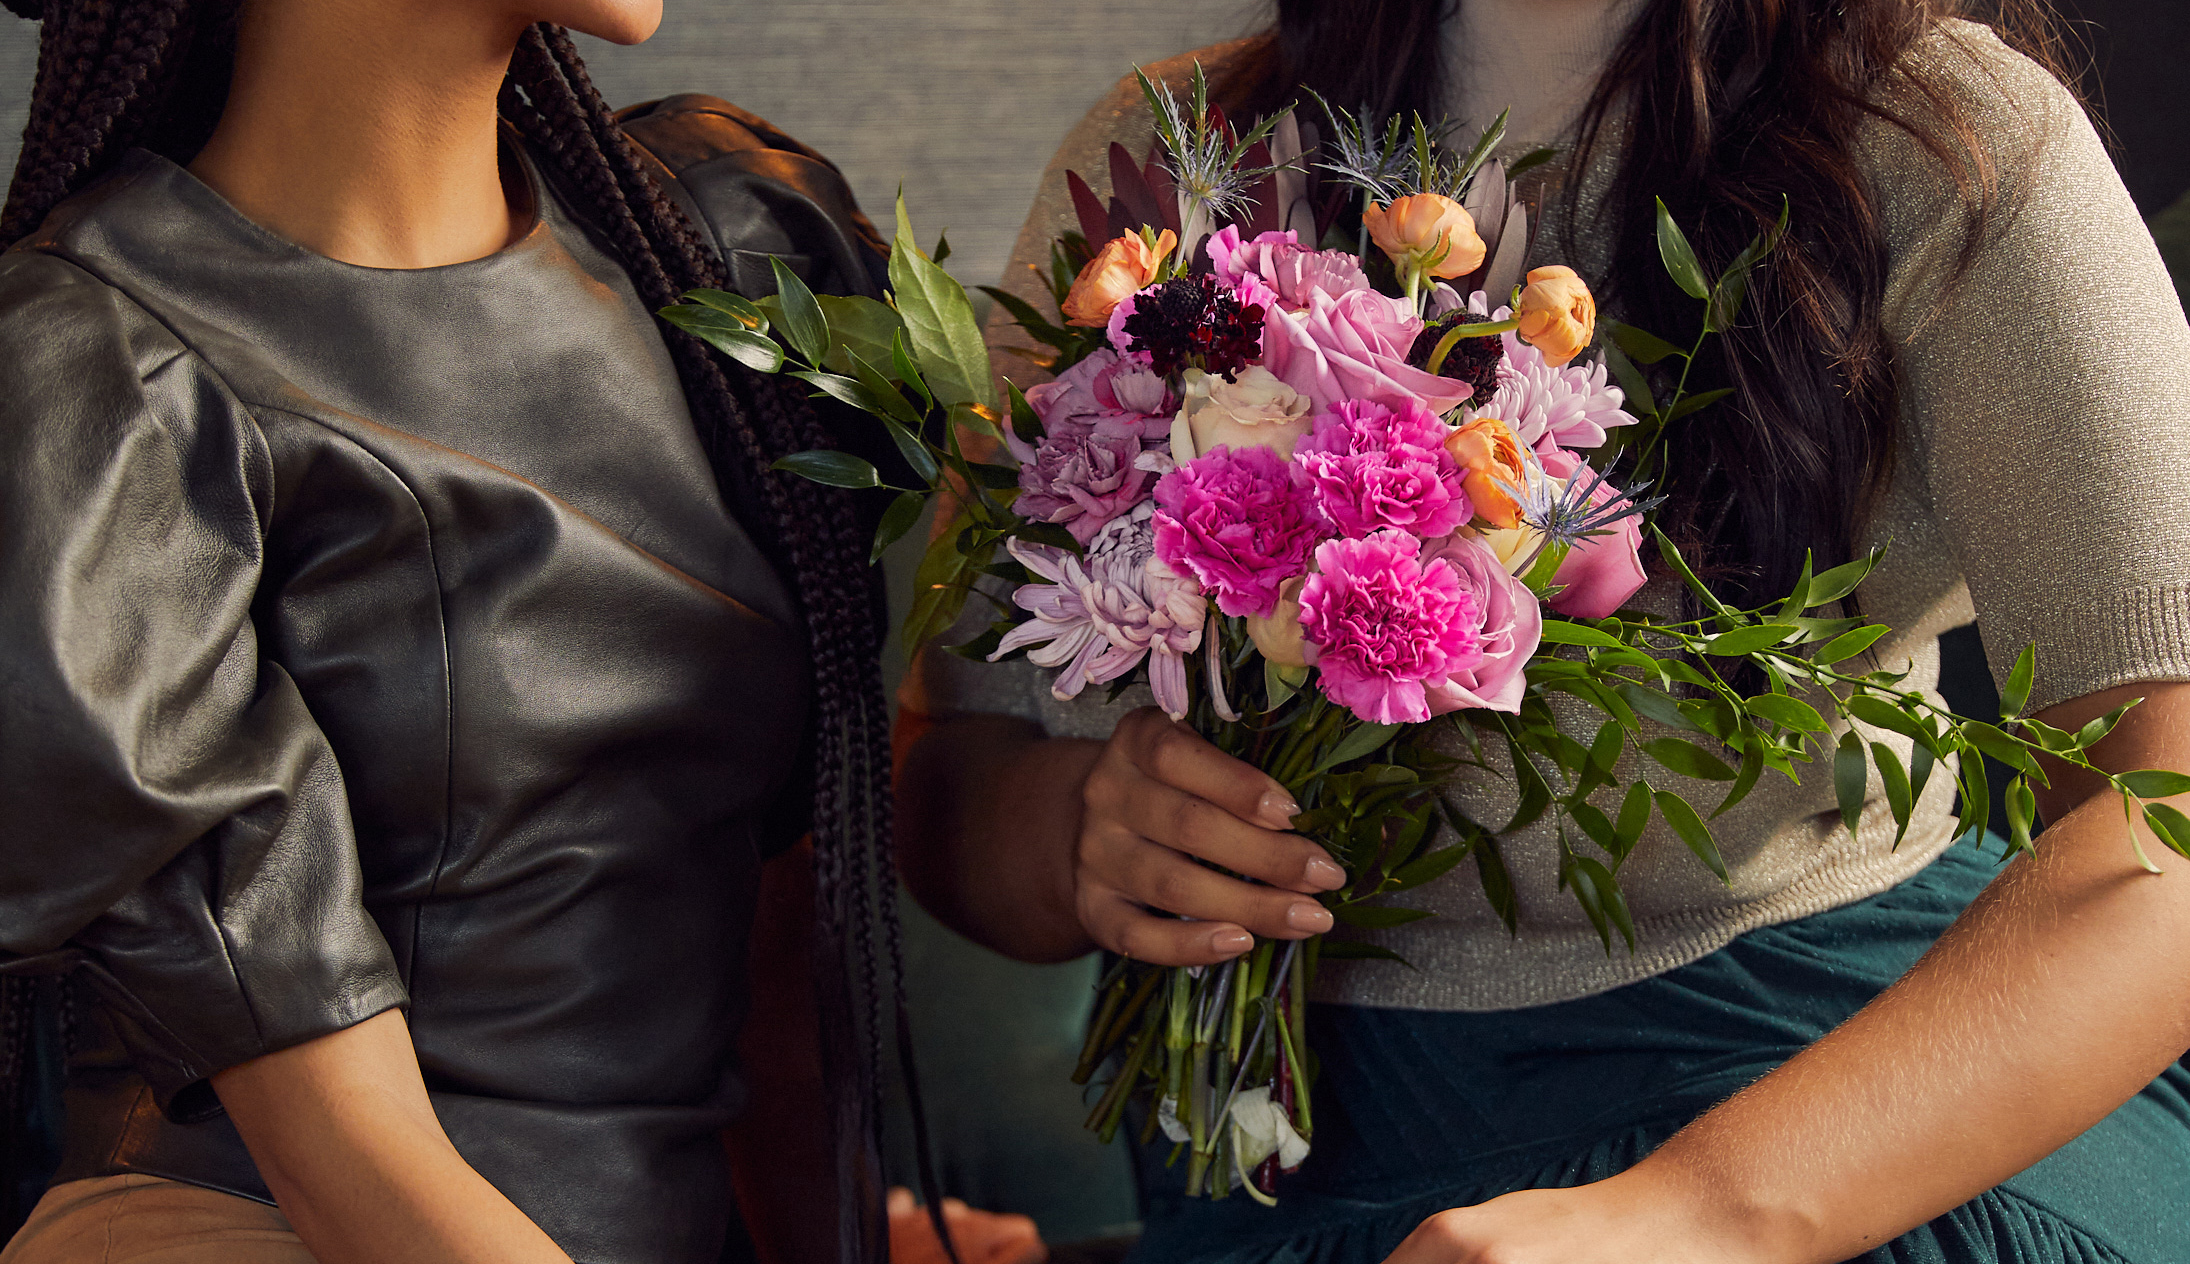 Women holding a floral bouquet as a holiday present